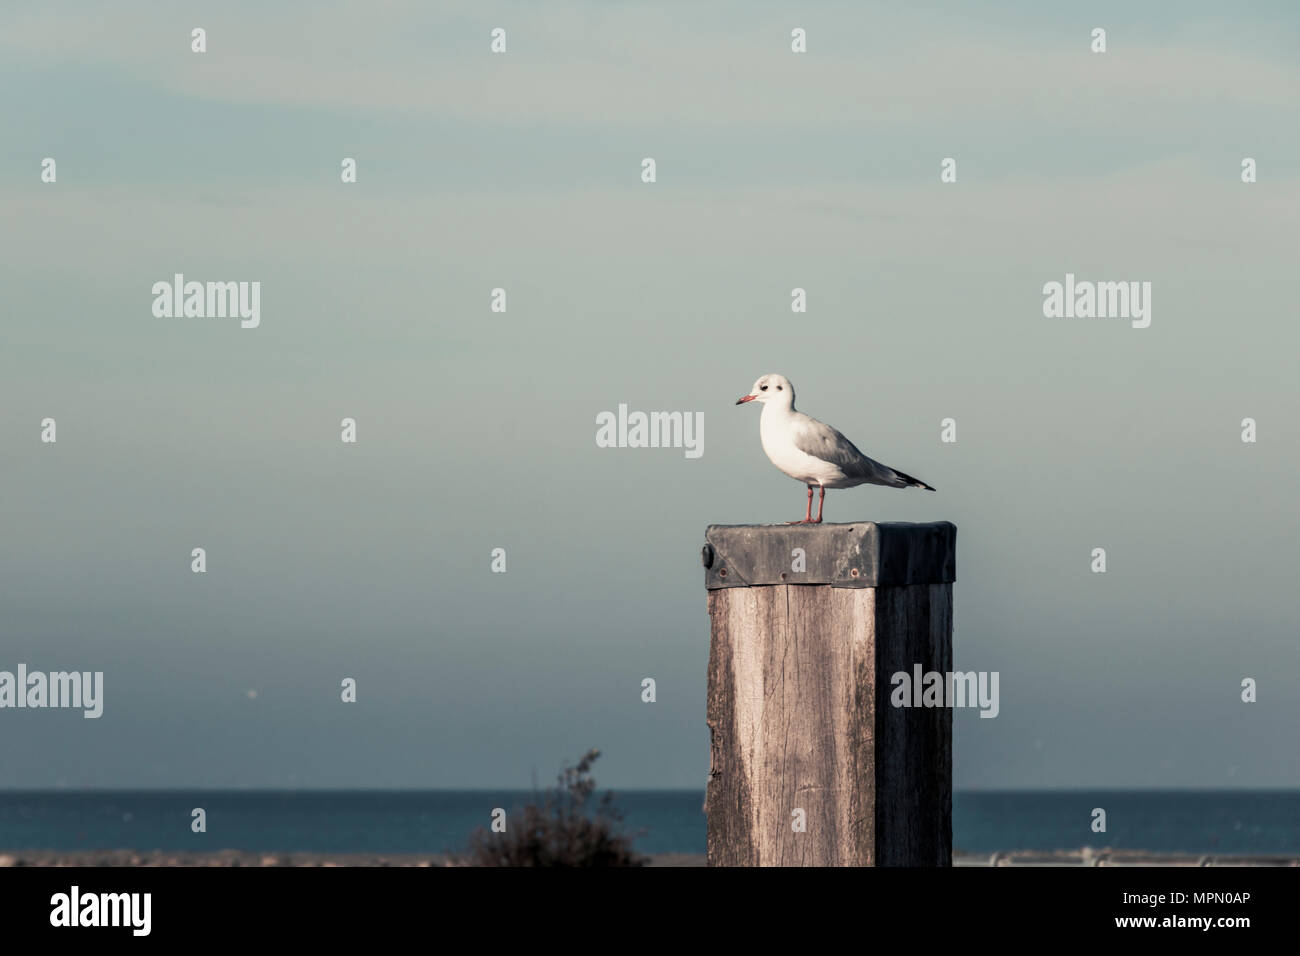 Germany, East Frisia, Seagull sitting on wooden pole Stock Photo